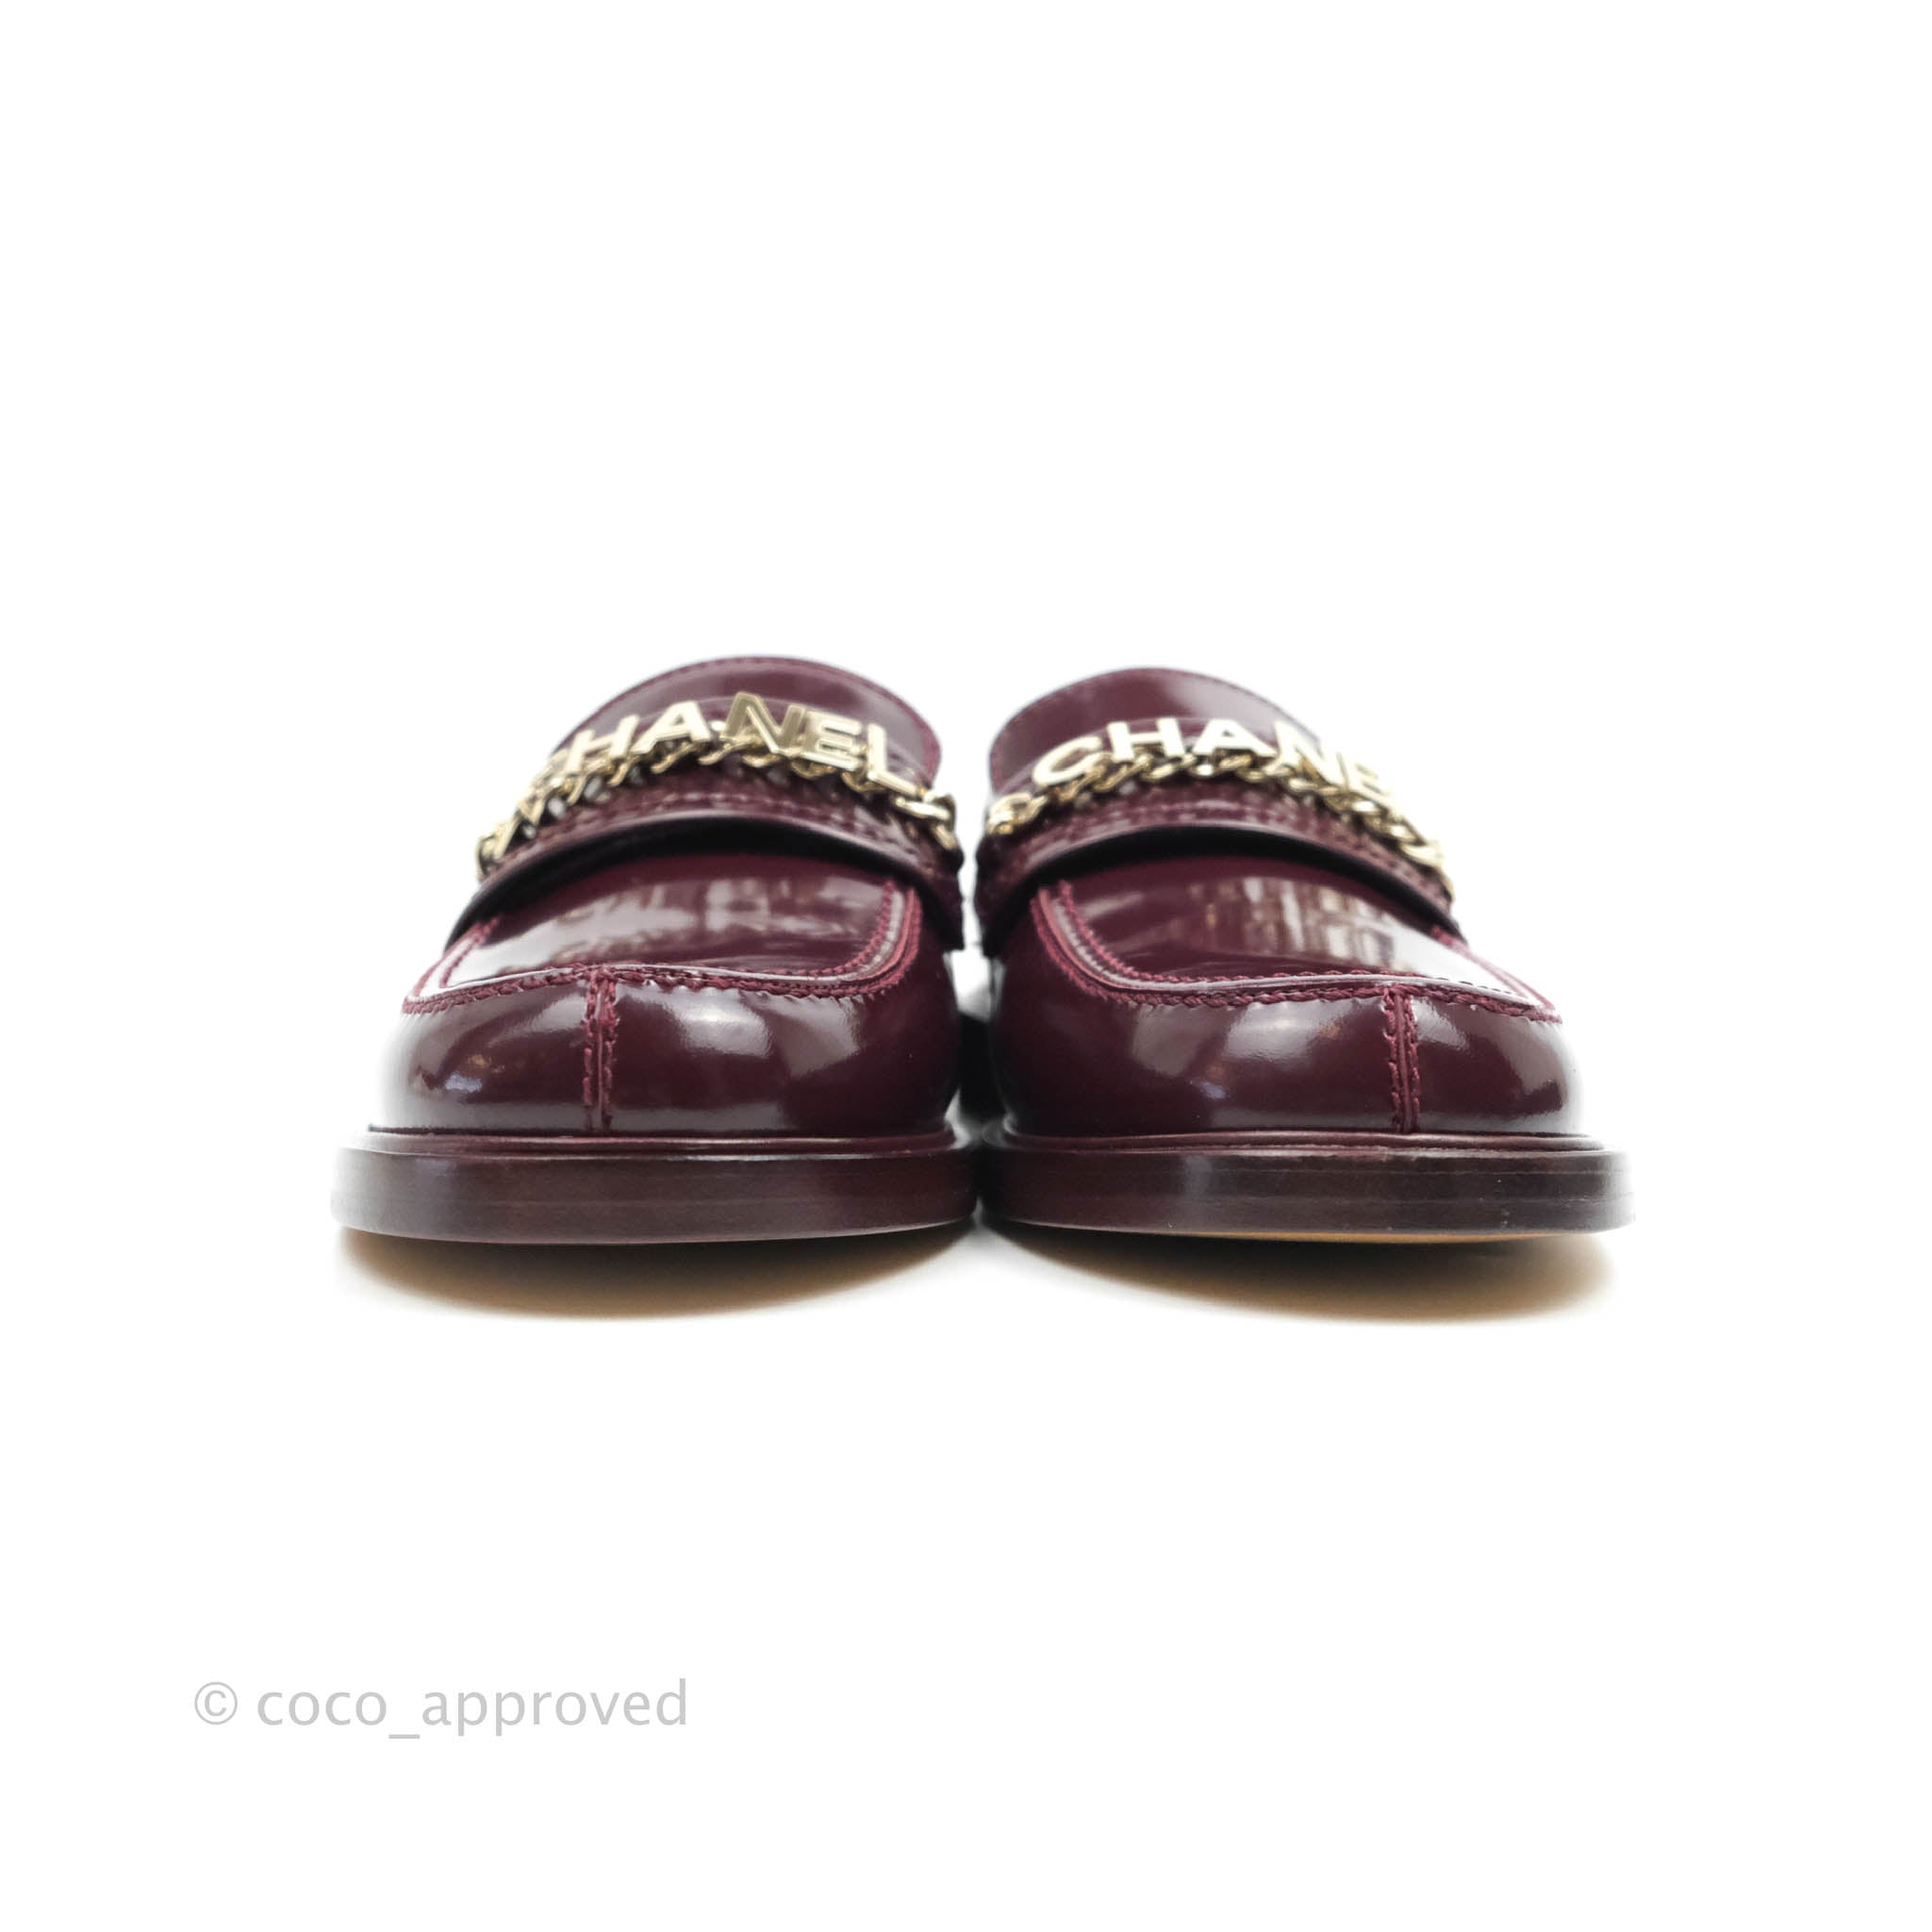 Louis Vuitton Burgundy Patent leather Oxford Loafers Size 39 Louis